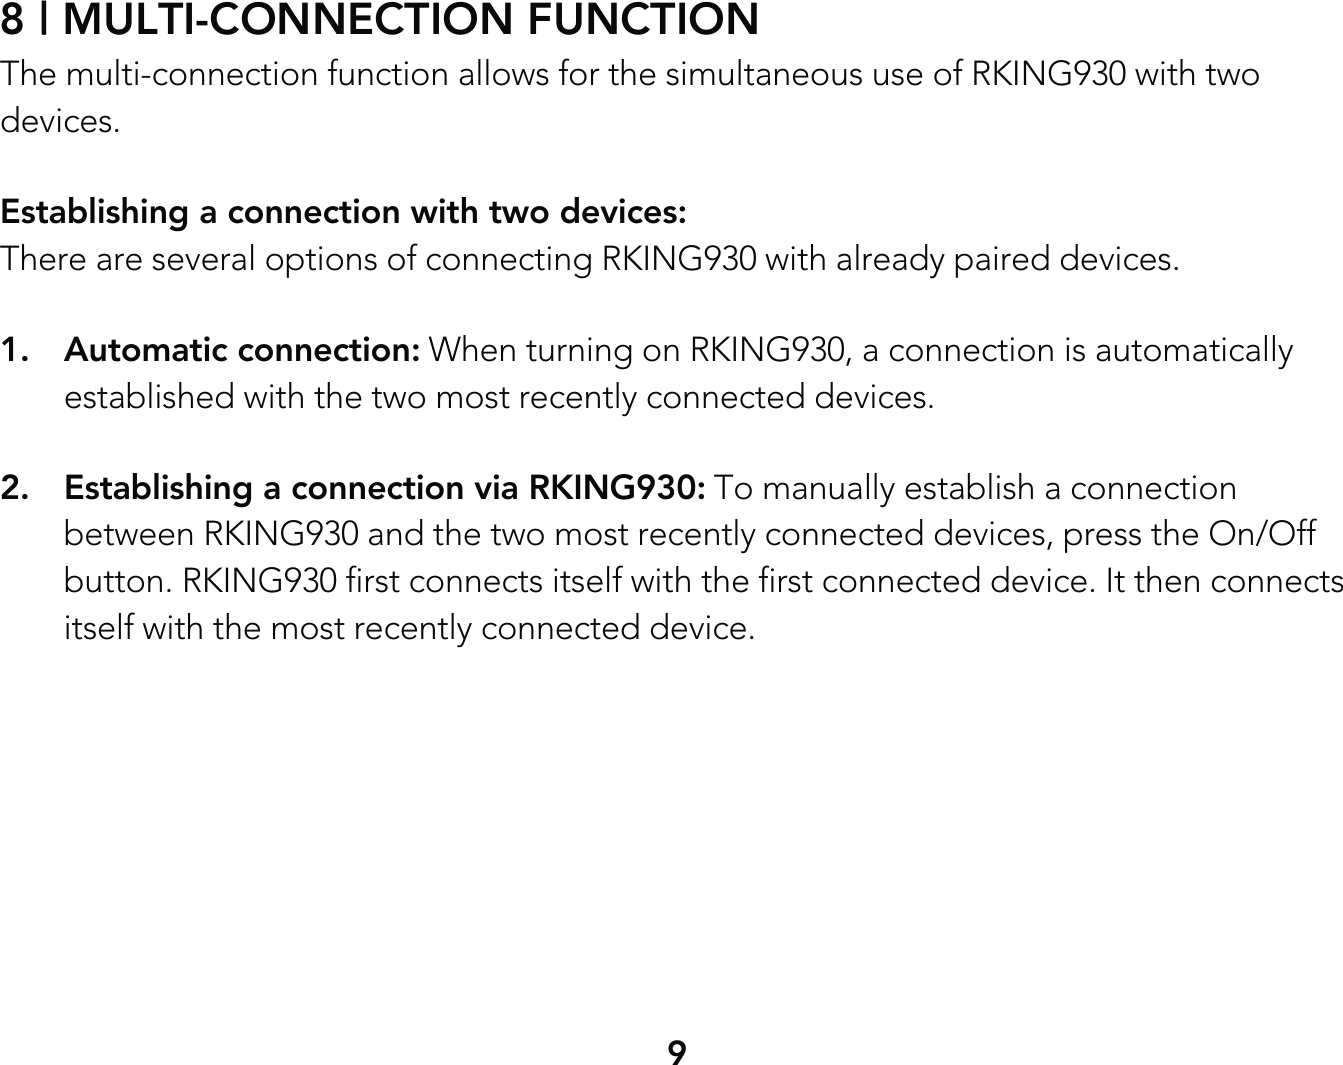 98 | MULTI-CONNECTION FUNCTIONThe multi-connection function allows for the simultaneous use of RKING930 with two devices.Establishing a connection with two devices: There are several options of connecting RKING930 with already paired devices.1. Automatic connection: When turning on RKING930, a connection is automatically   established with the two most recently connected devices.2.  Establishing a connection via RKING930: To manually establish a connection   between RKING930 and the two most recently connected devices, press the On/Off   button. RKING930 first connects itself with the first connected device. It then connects   itself with the most recently connected device.